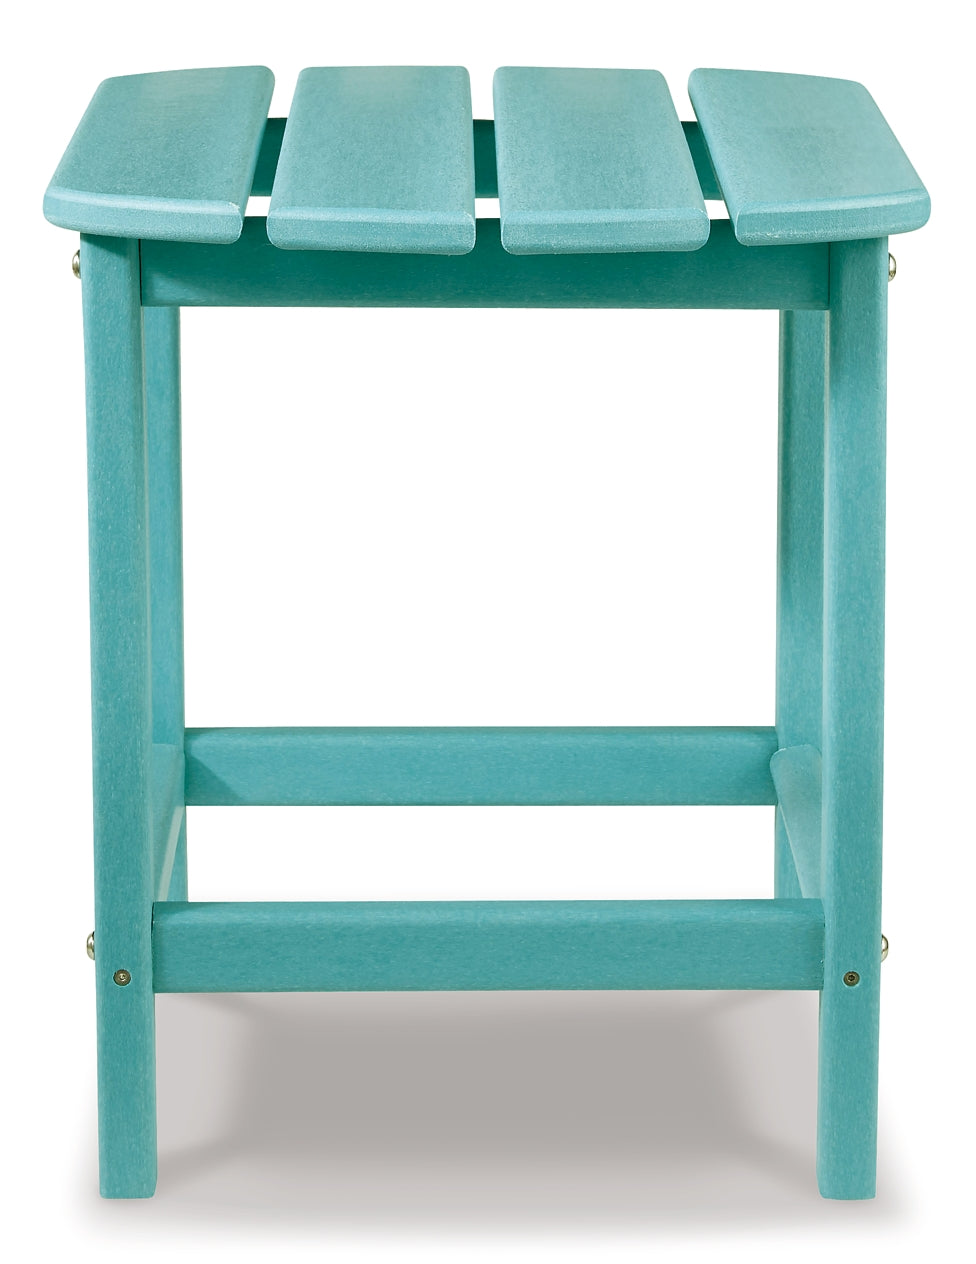 Sundown Treasure Outdoor Chair with End Table